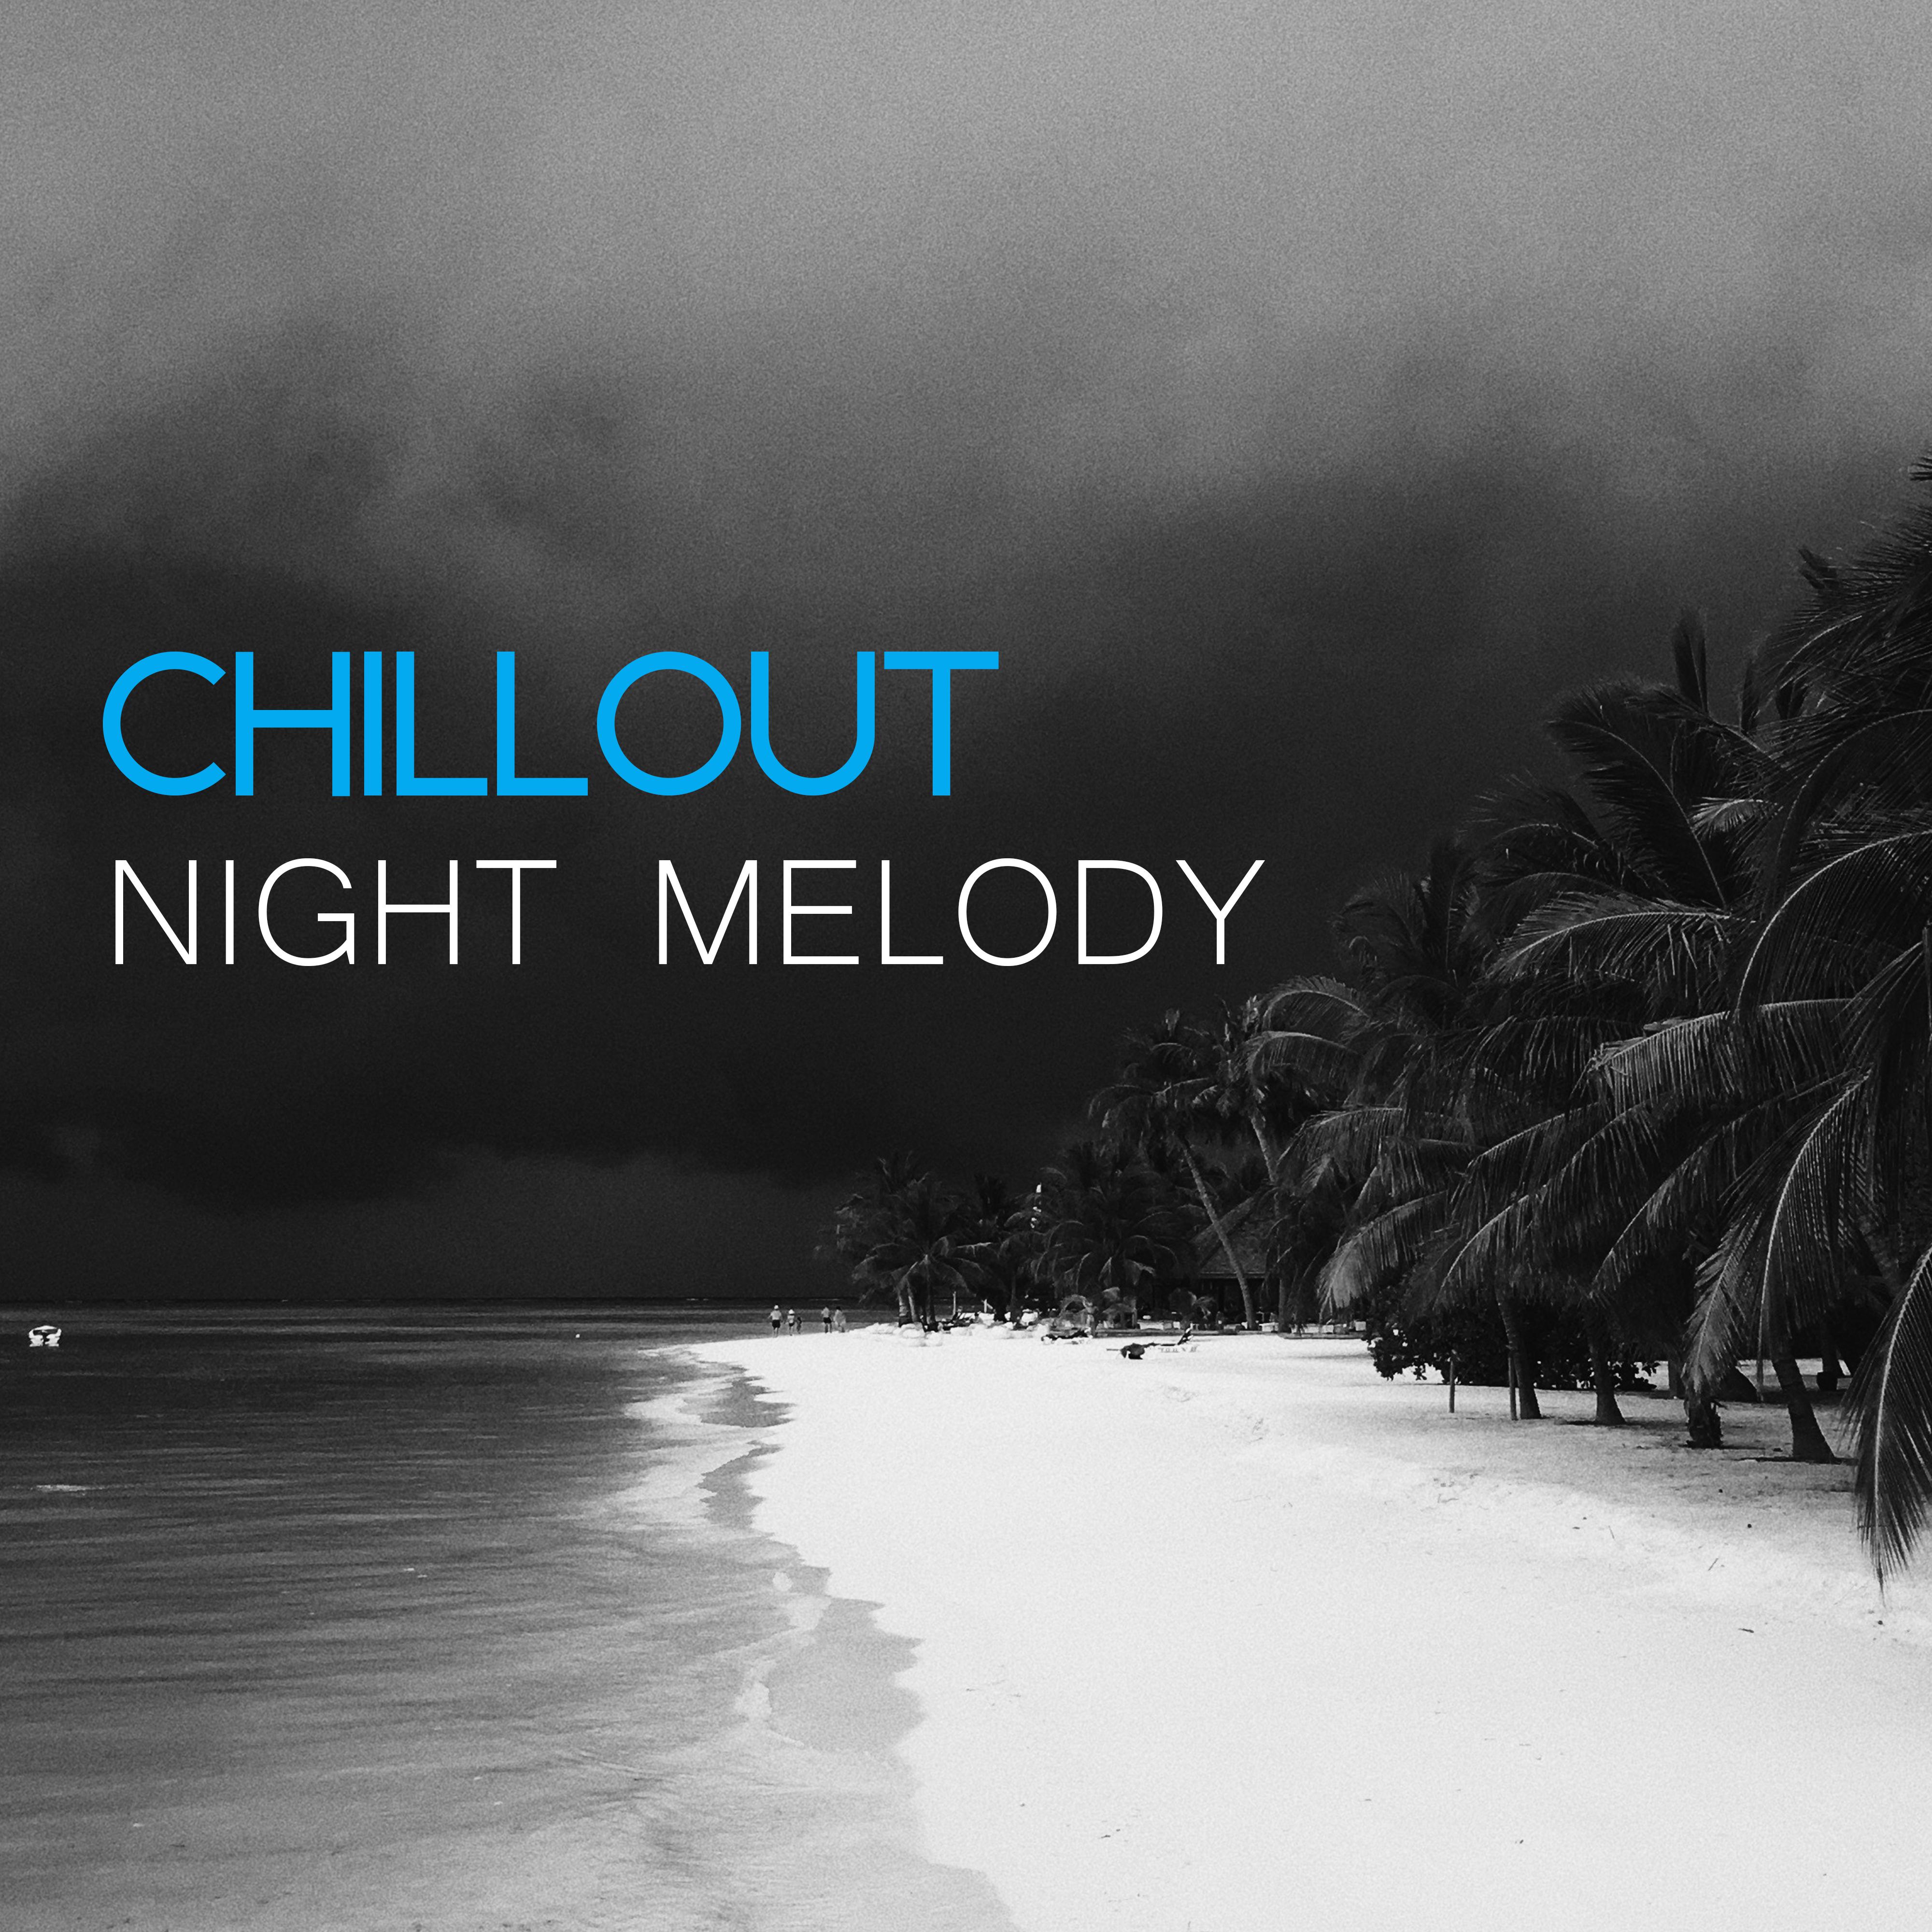 Chillout Night Melody